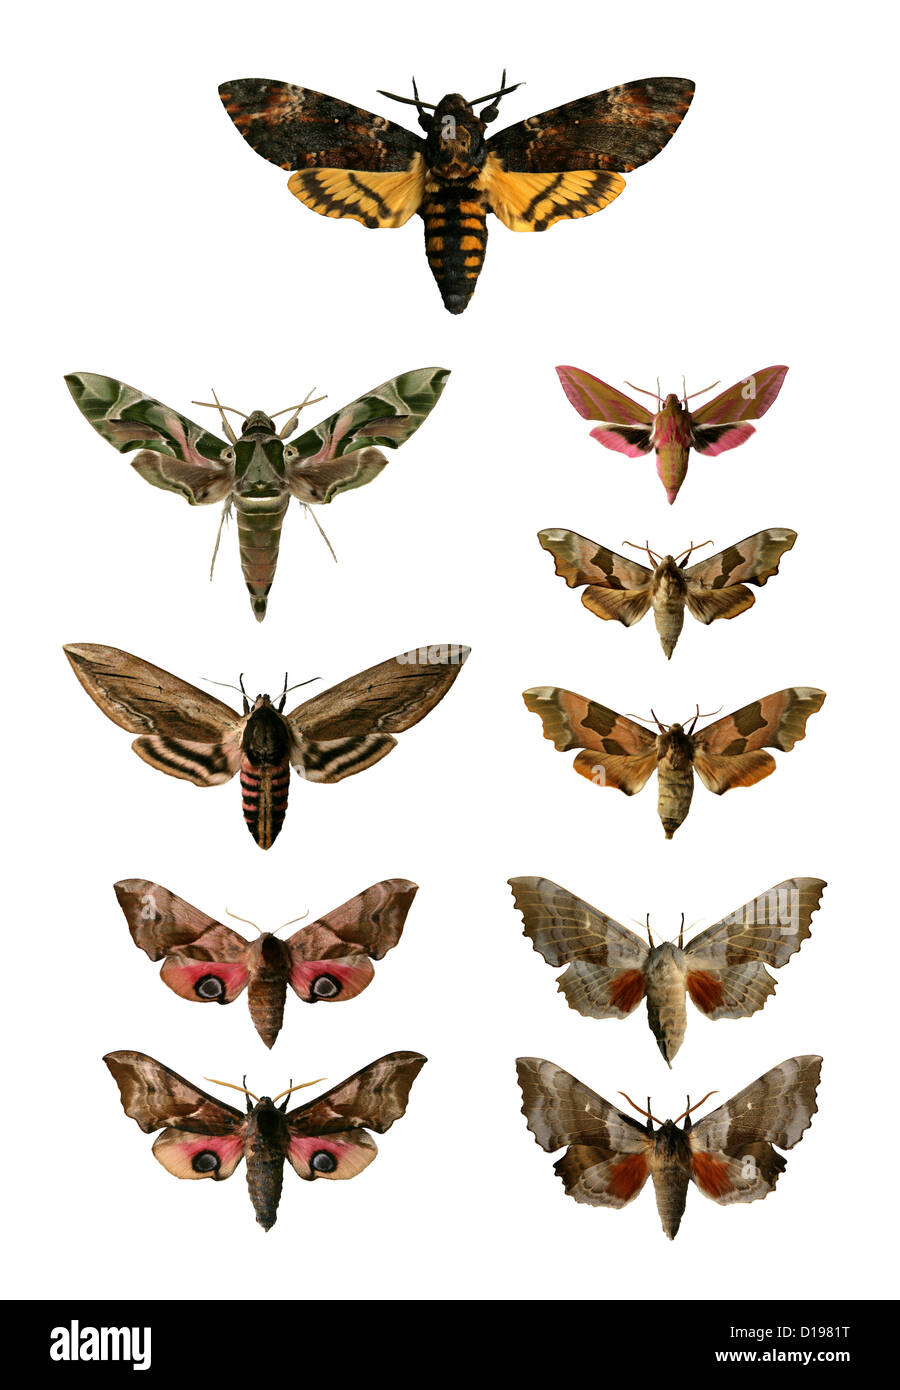 A Group of European Hawk-moths in the Sphingidae Family. Stock Photo